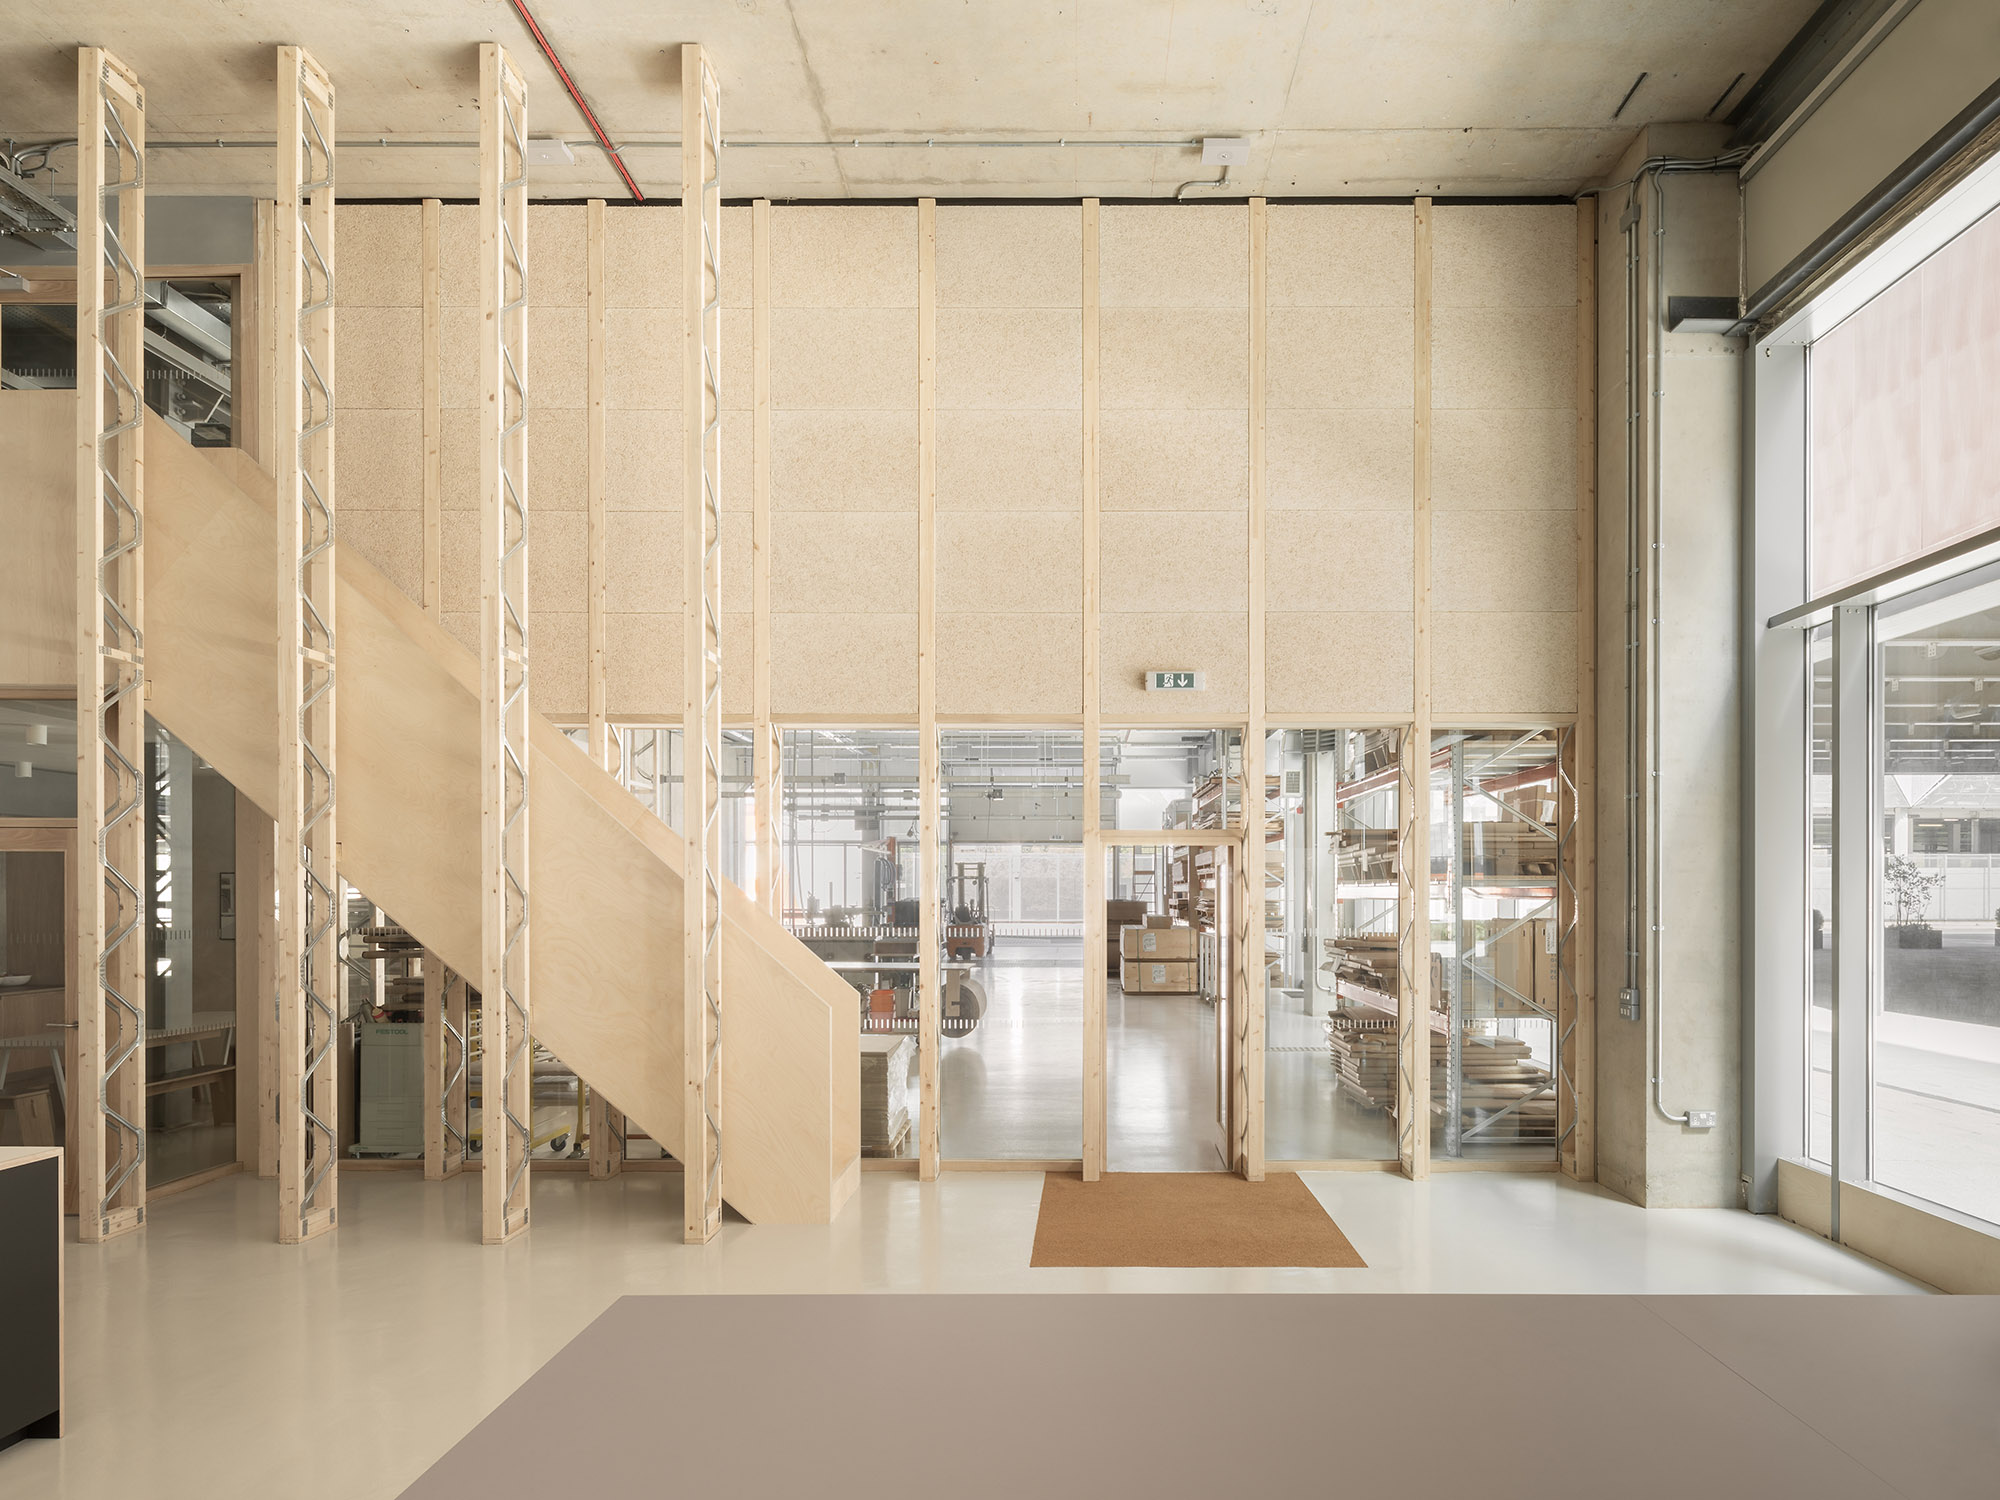 Erbar Mattes Architects Here East Stratford Hackney Plykea workshop showroom office refurbishment retrofit interior fit out timber studwork open web joists wood wool boards